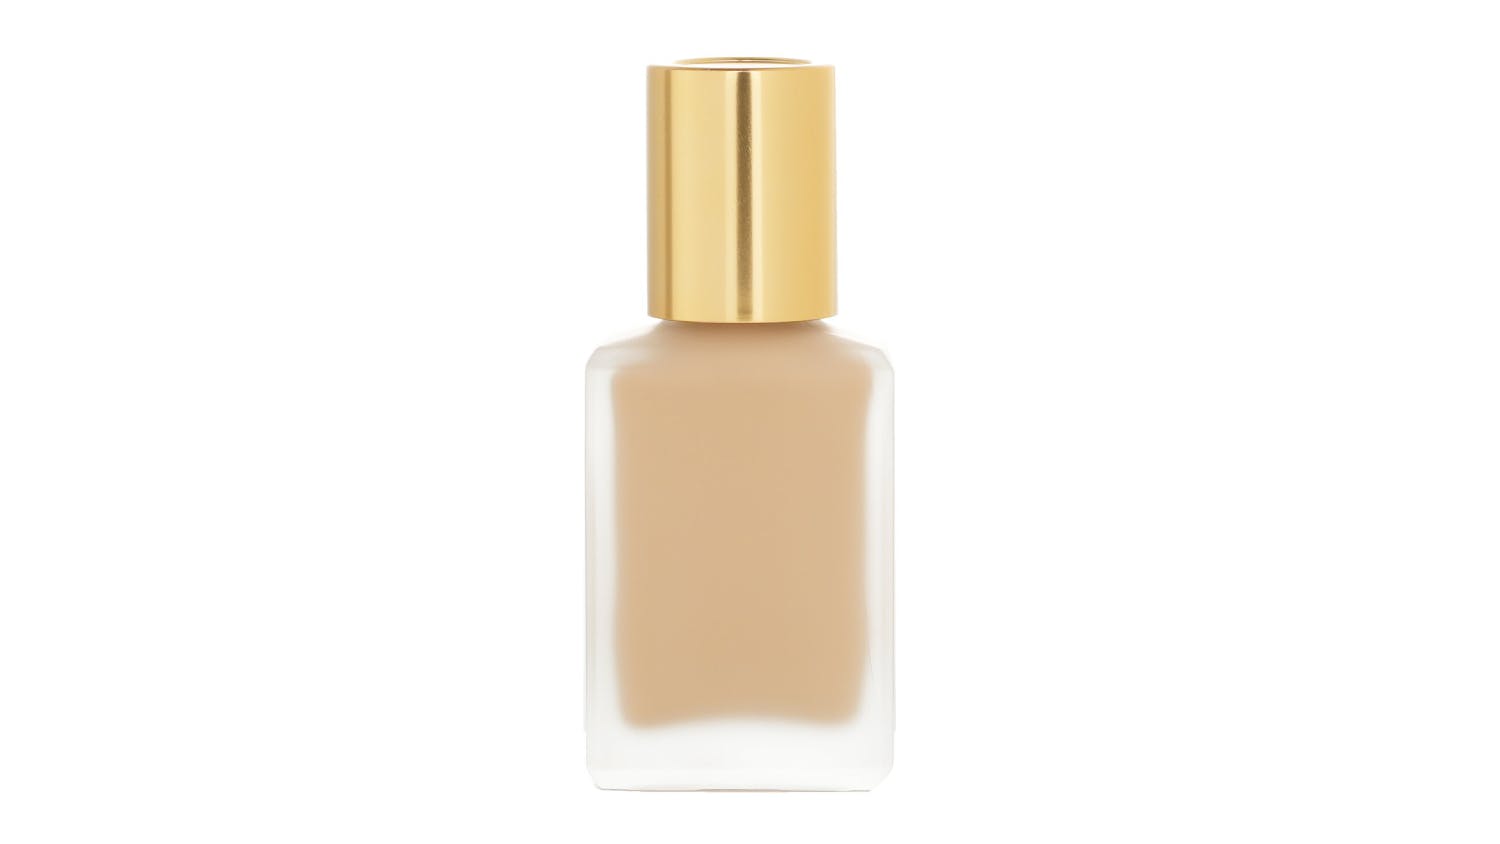 Estee Lauder Double Wear Stay In Place Makeup SPF 10 - No. 36 Sand (1W2) - 30ml/1oz